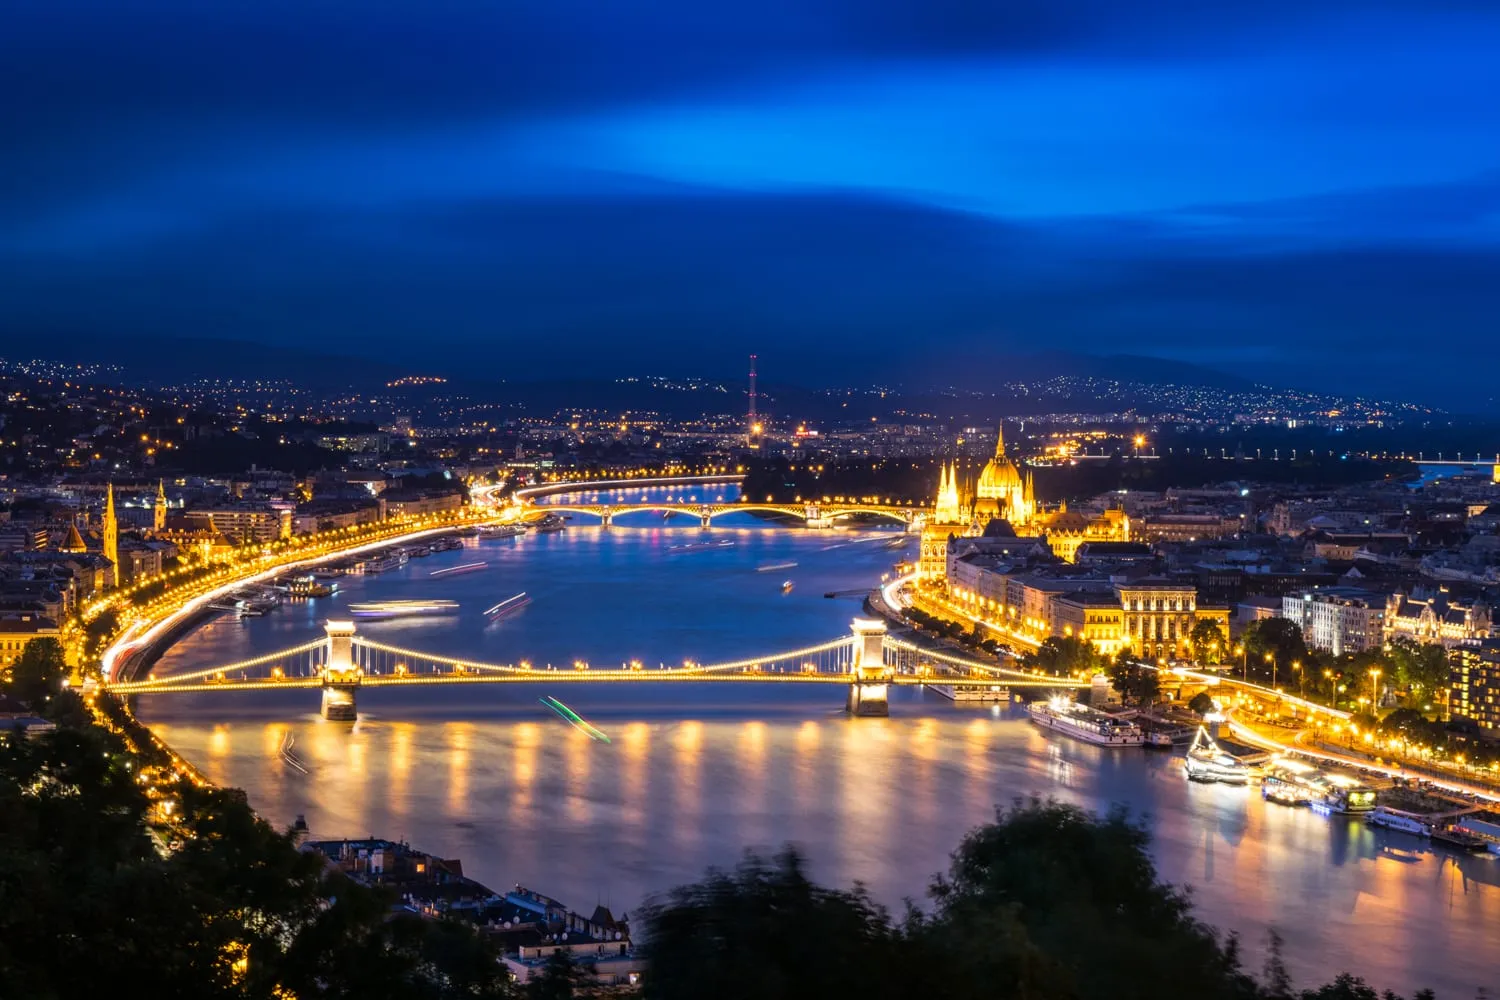 prague or budapest: which one should you visit? - our escape